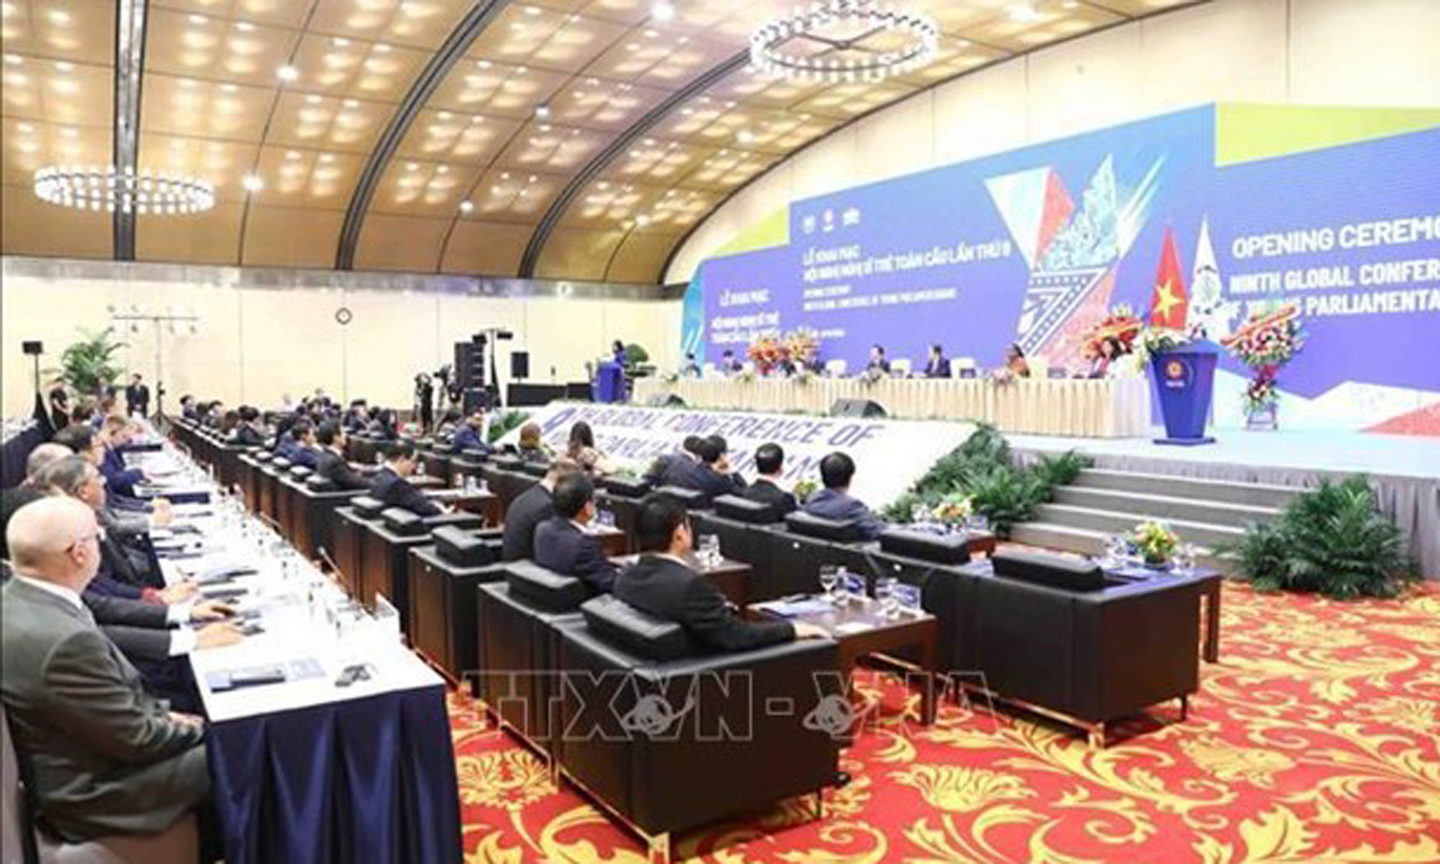 At the opening ceremony of the 9th Global Conference of Young Parliamentarians in Hanoi on September 15 (Photo: VNA).